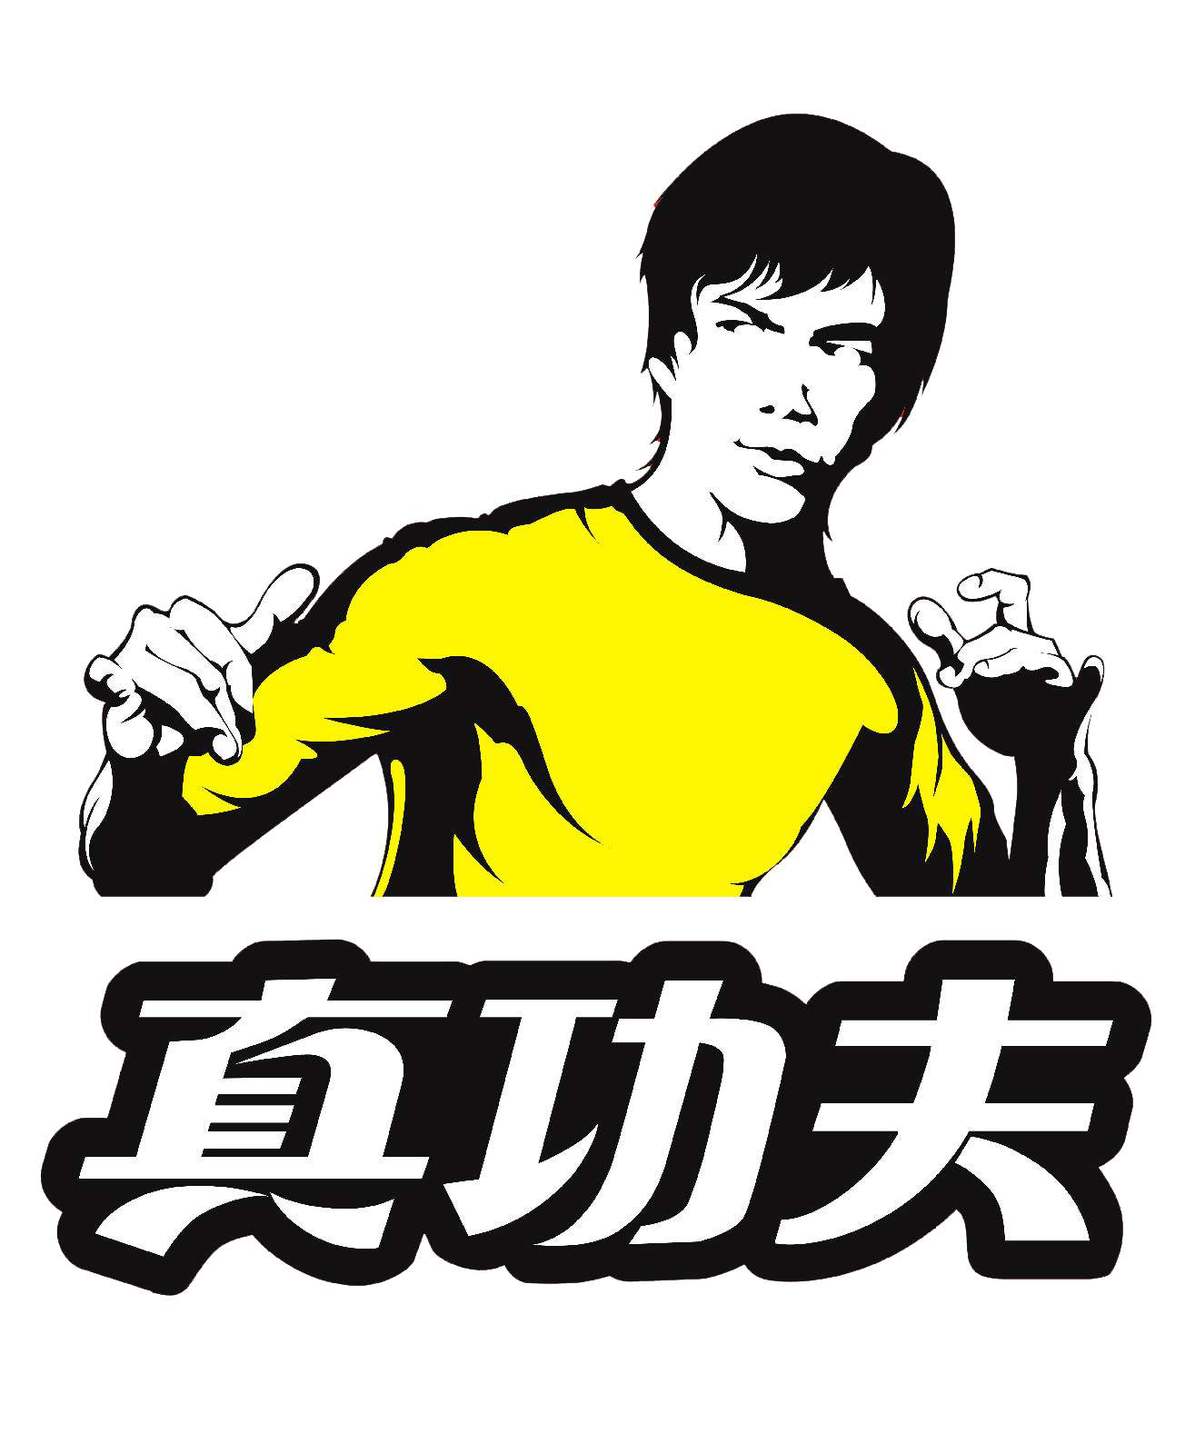 Bruce Lee's daughter sues restaurant over logo use 